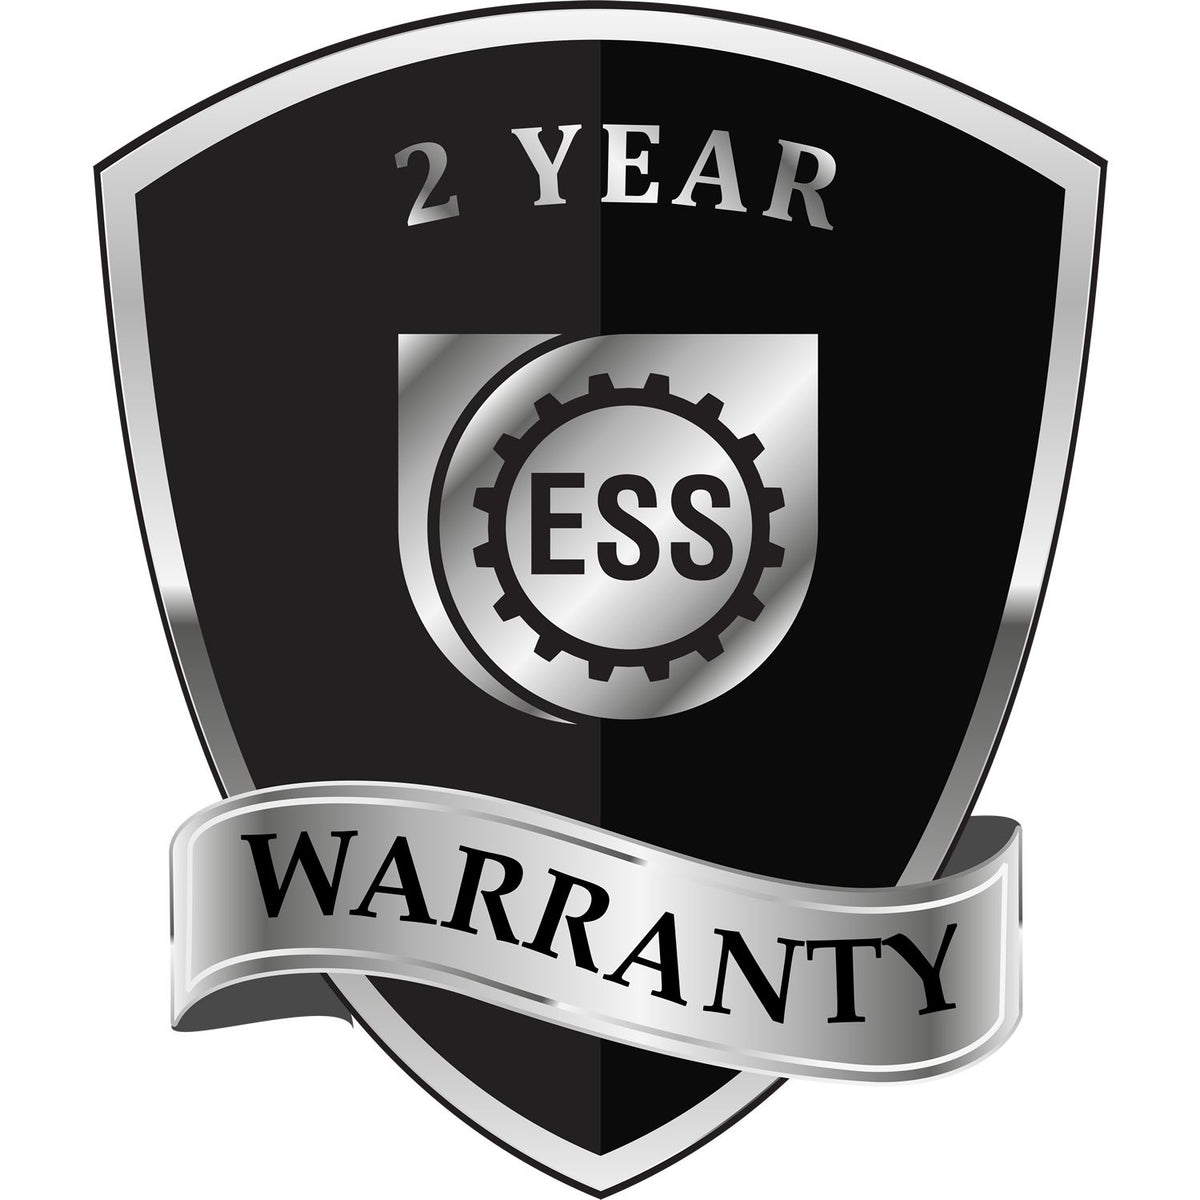 A black and silver badge or emblem showing warranty information for the Long Reach Virginia Geology Seal